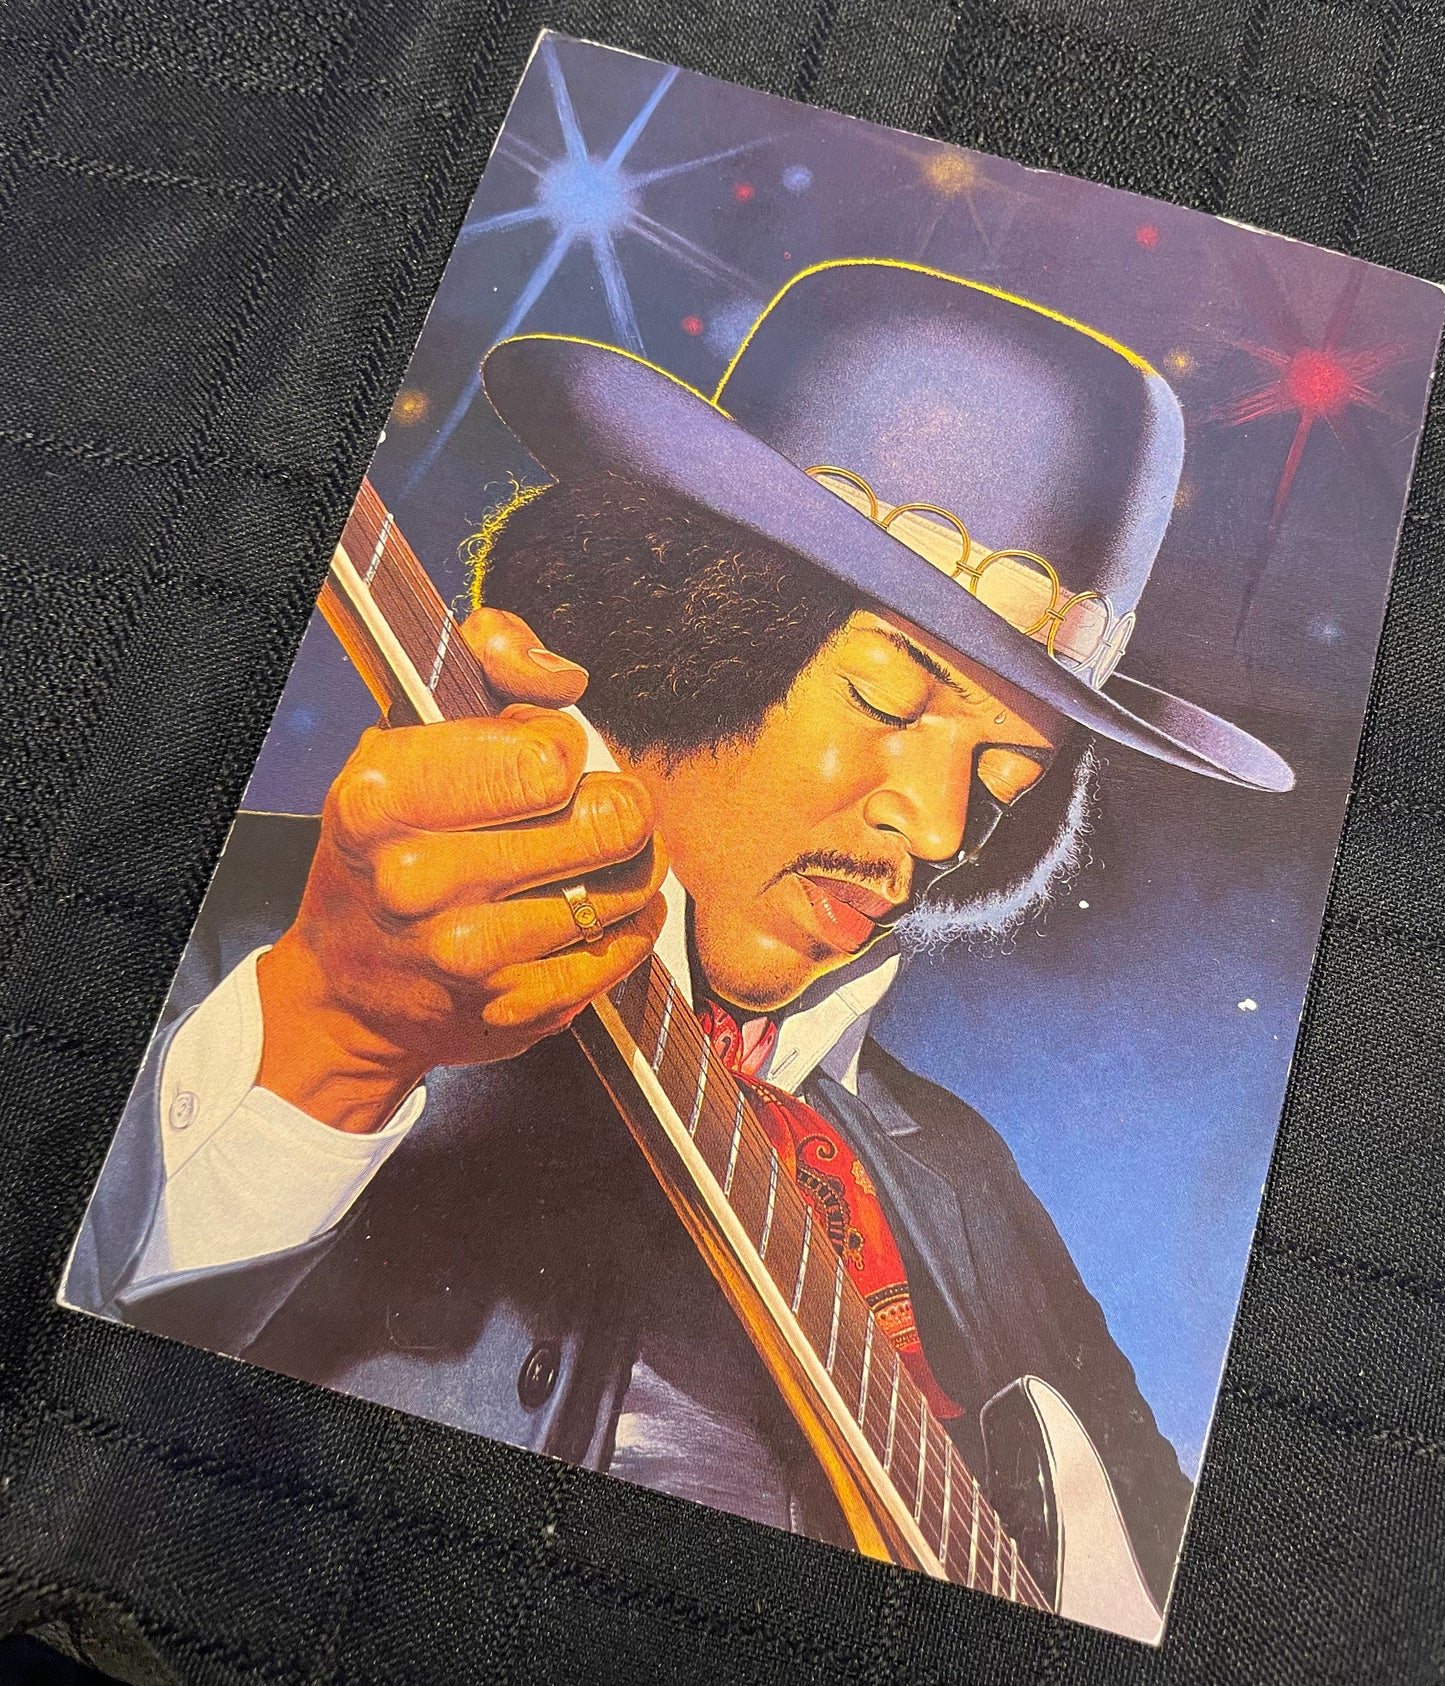 Jimi Hendrix - Illustrated Post Card by David O'Connor